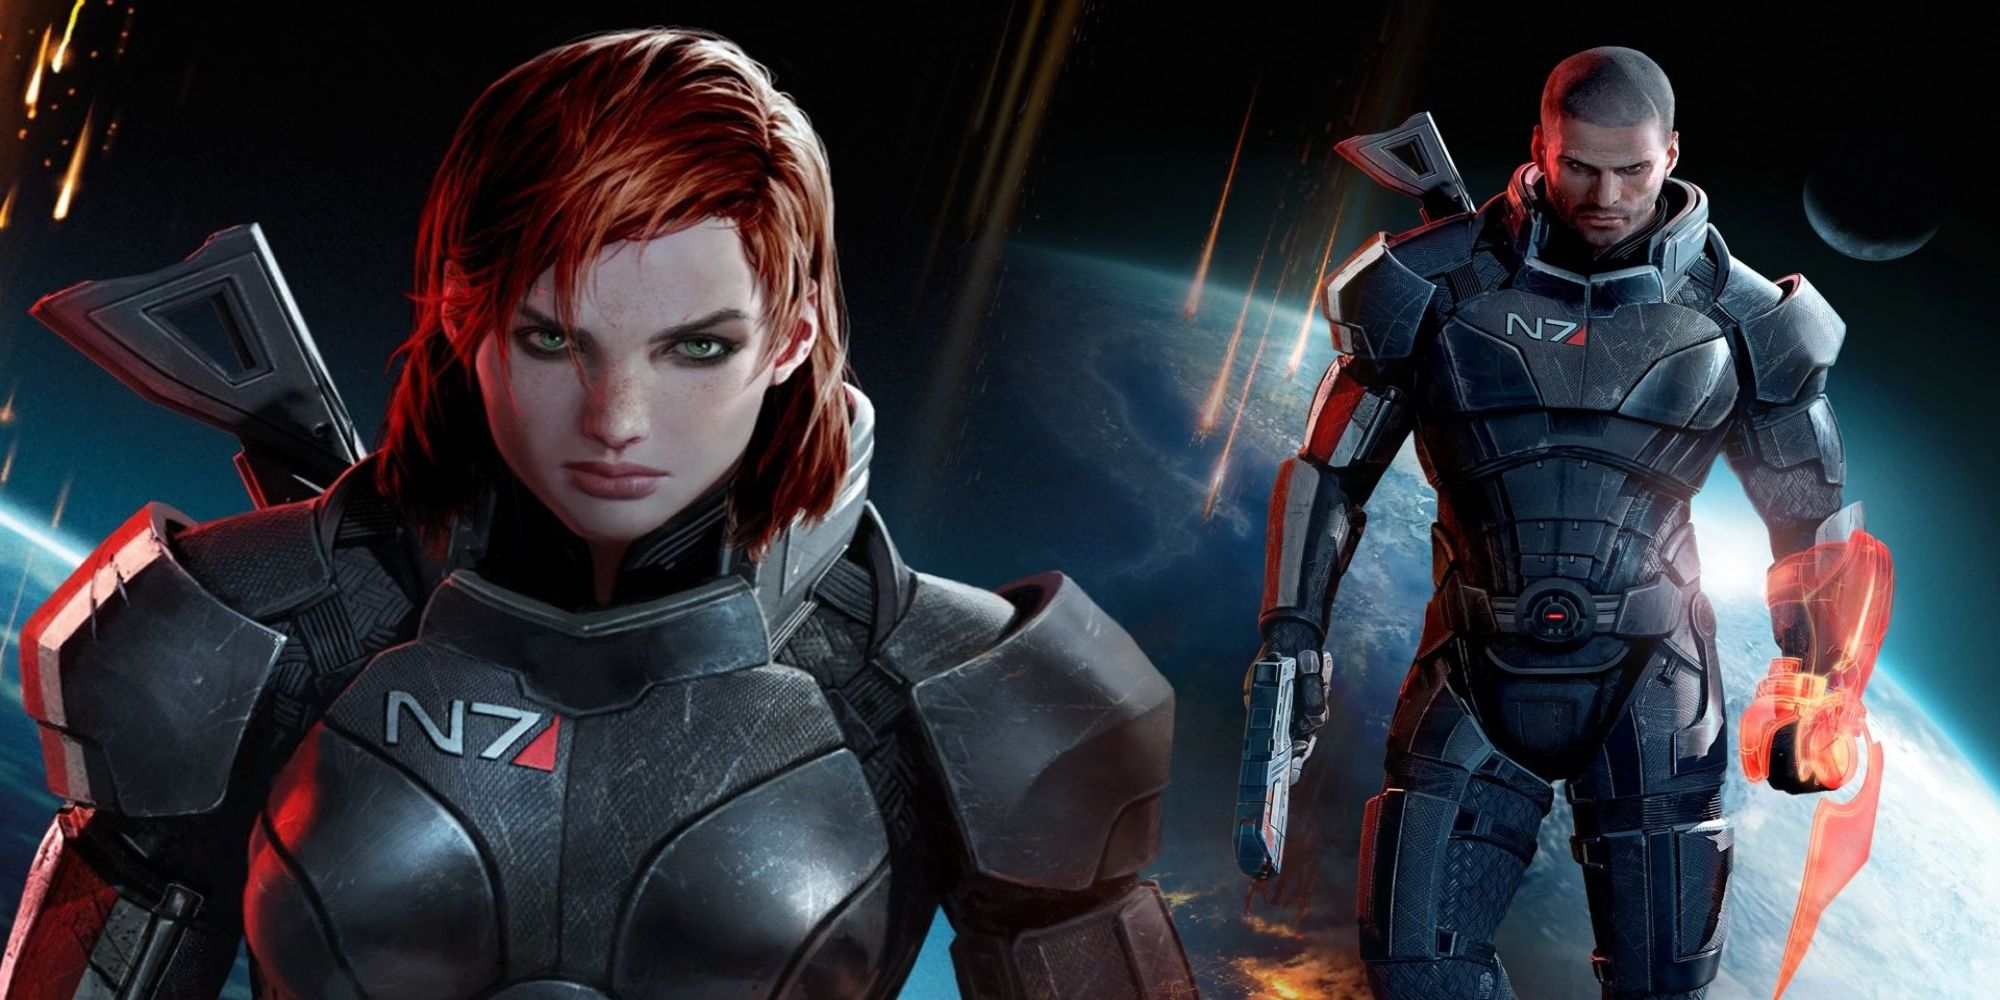 The premade Shepard characters in both female and male form from Mass Effect game